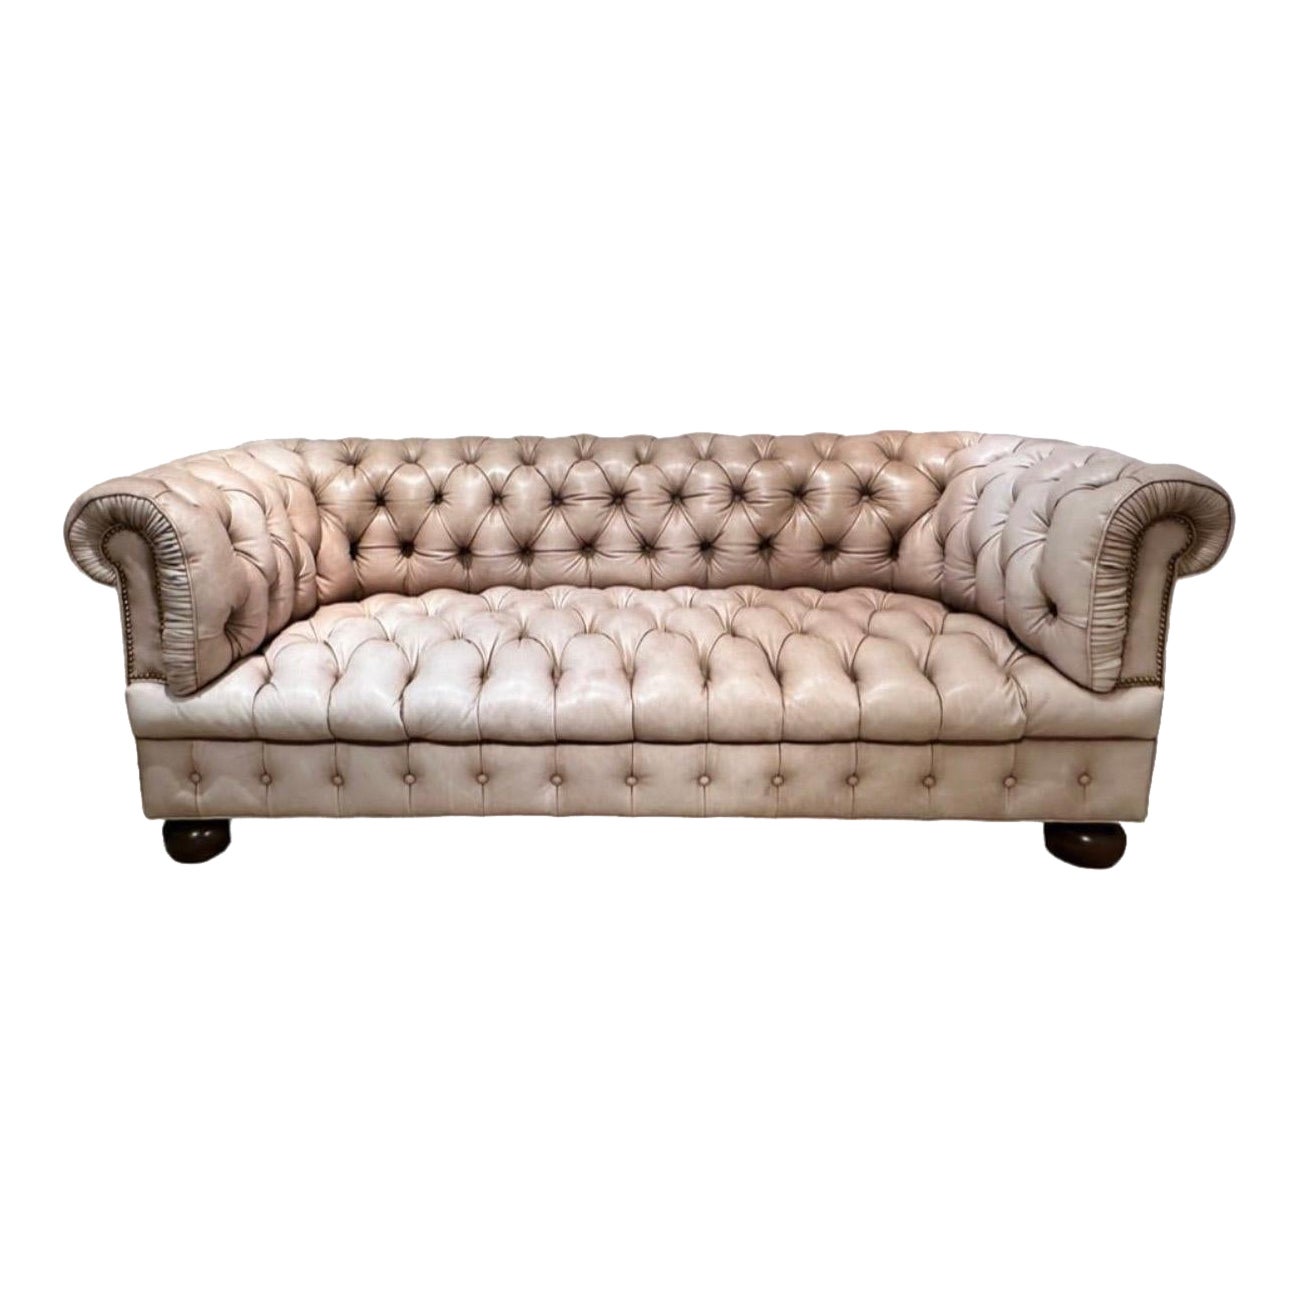 1970s Vintage Leather Chesterfield Sofa by Stark, London For Sale